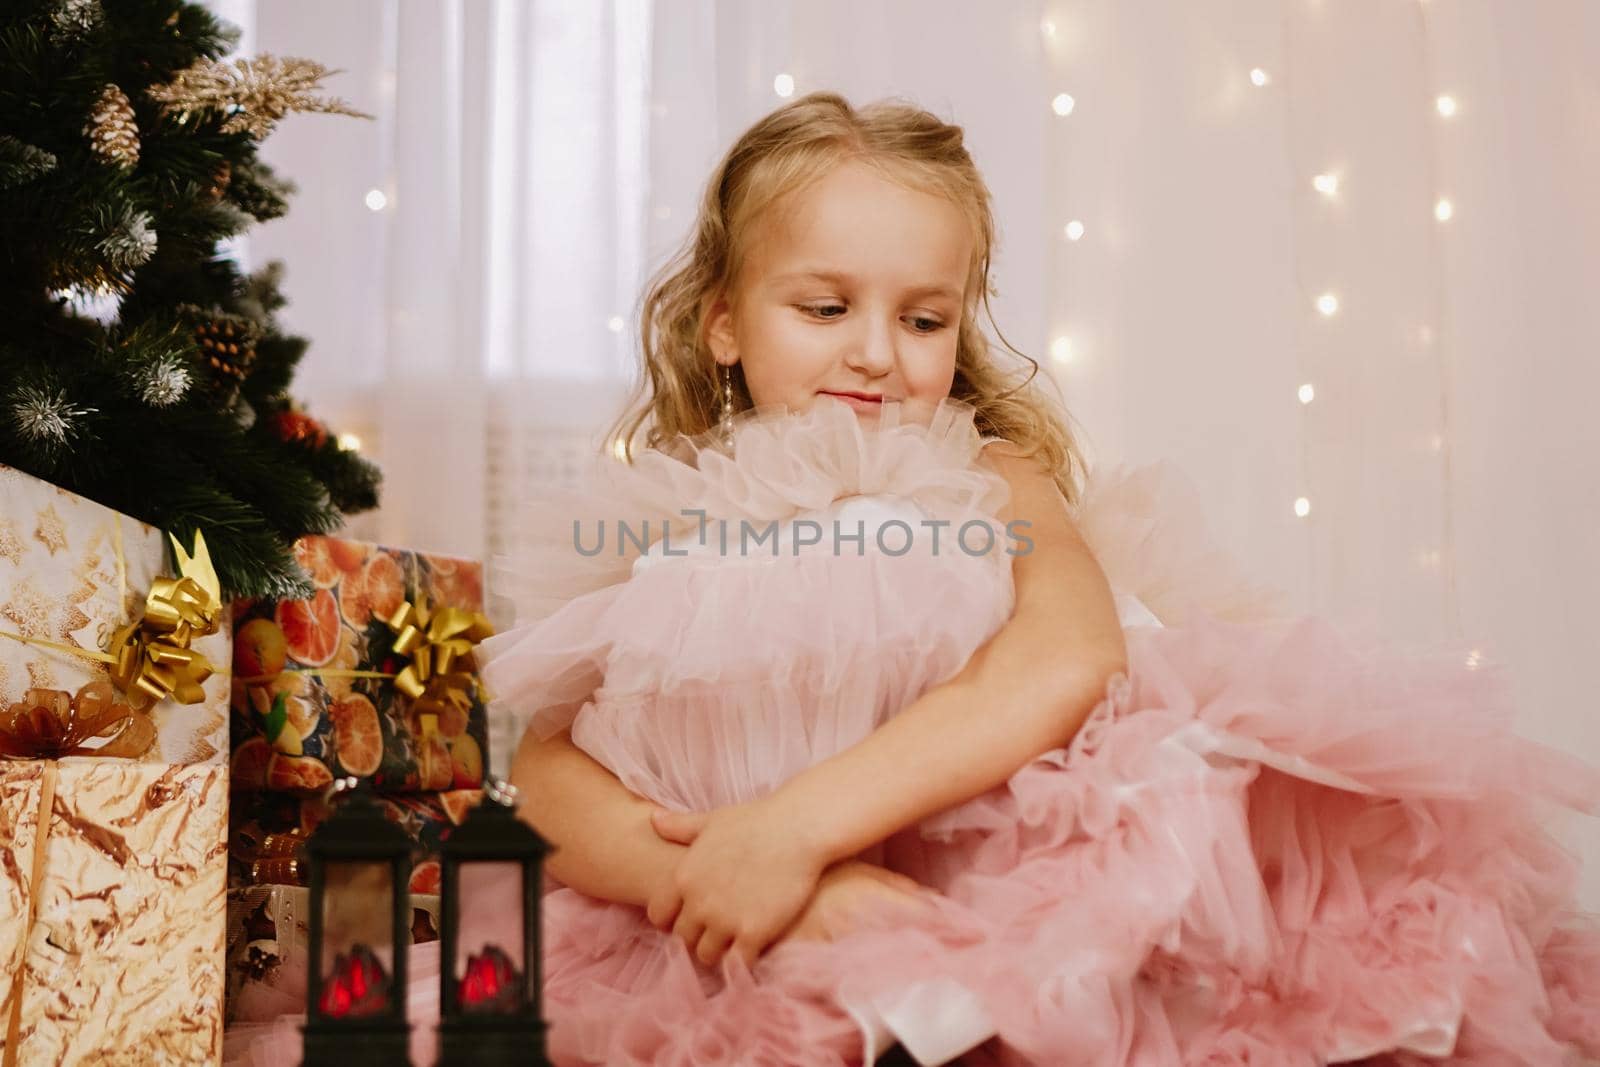 Girl in a pink dress near the Christmas tree by natali_brill